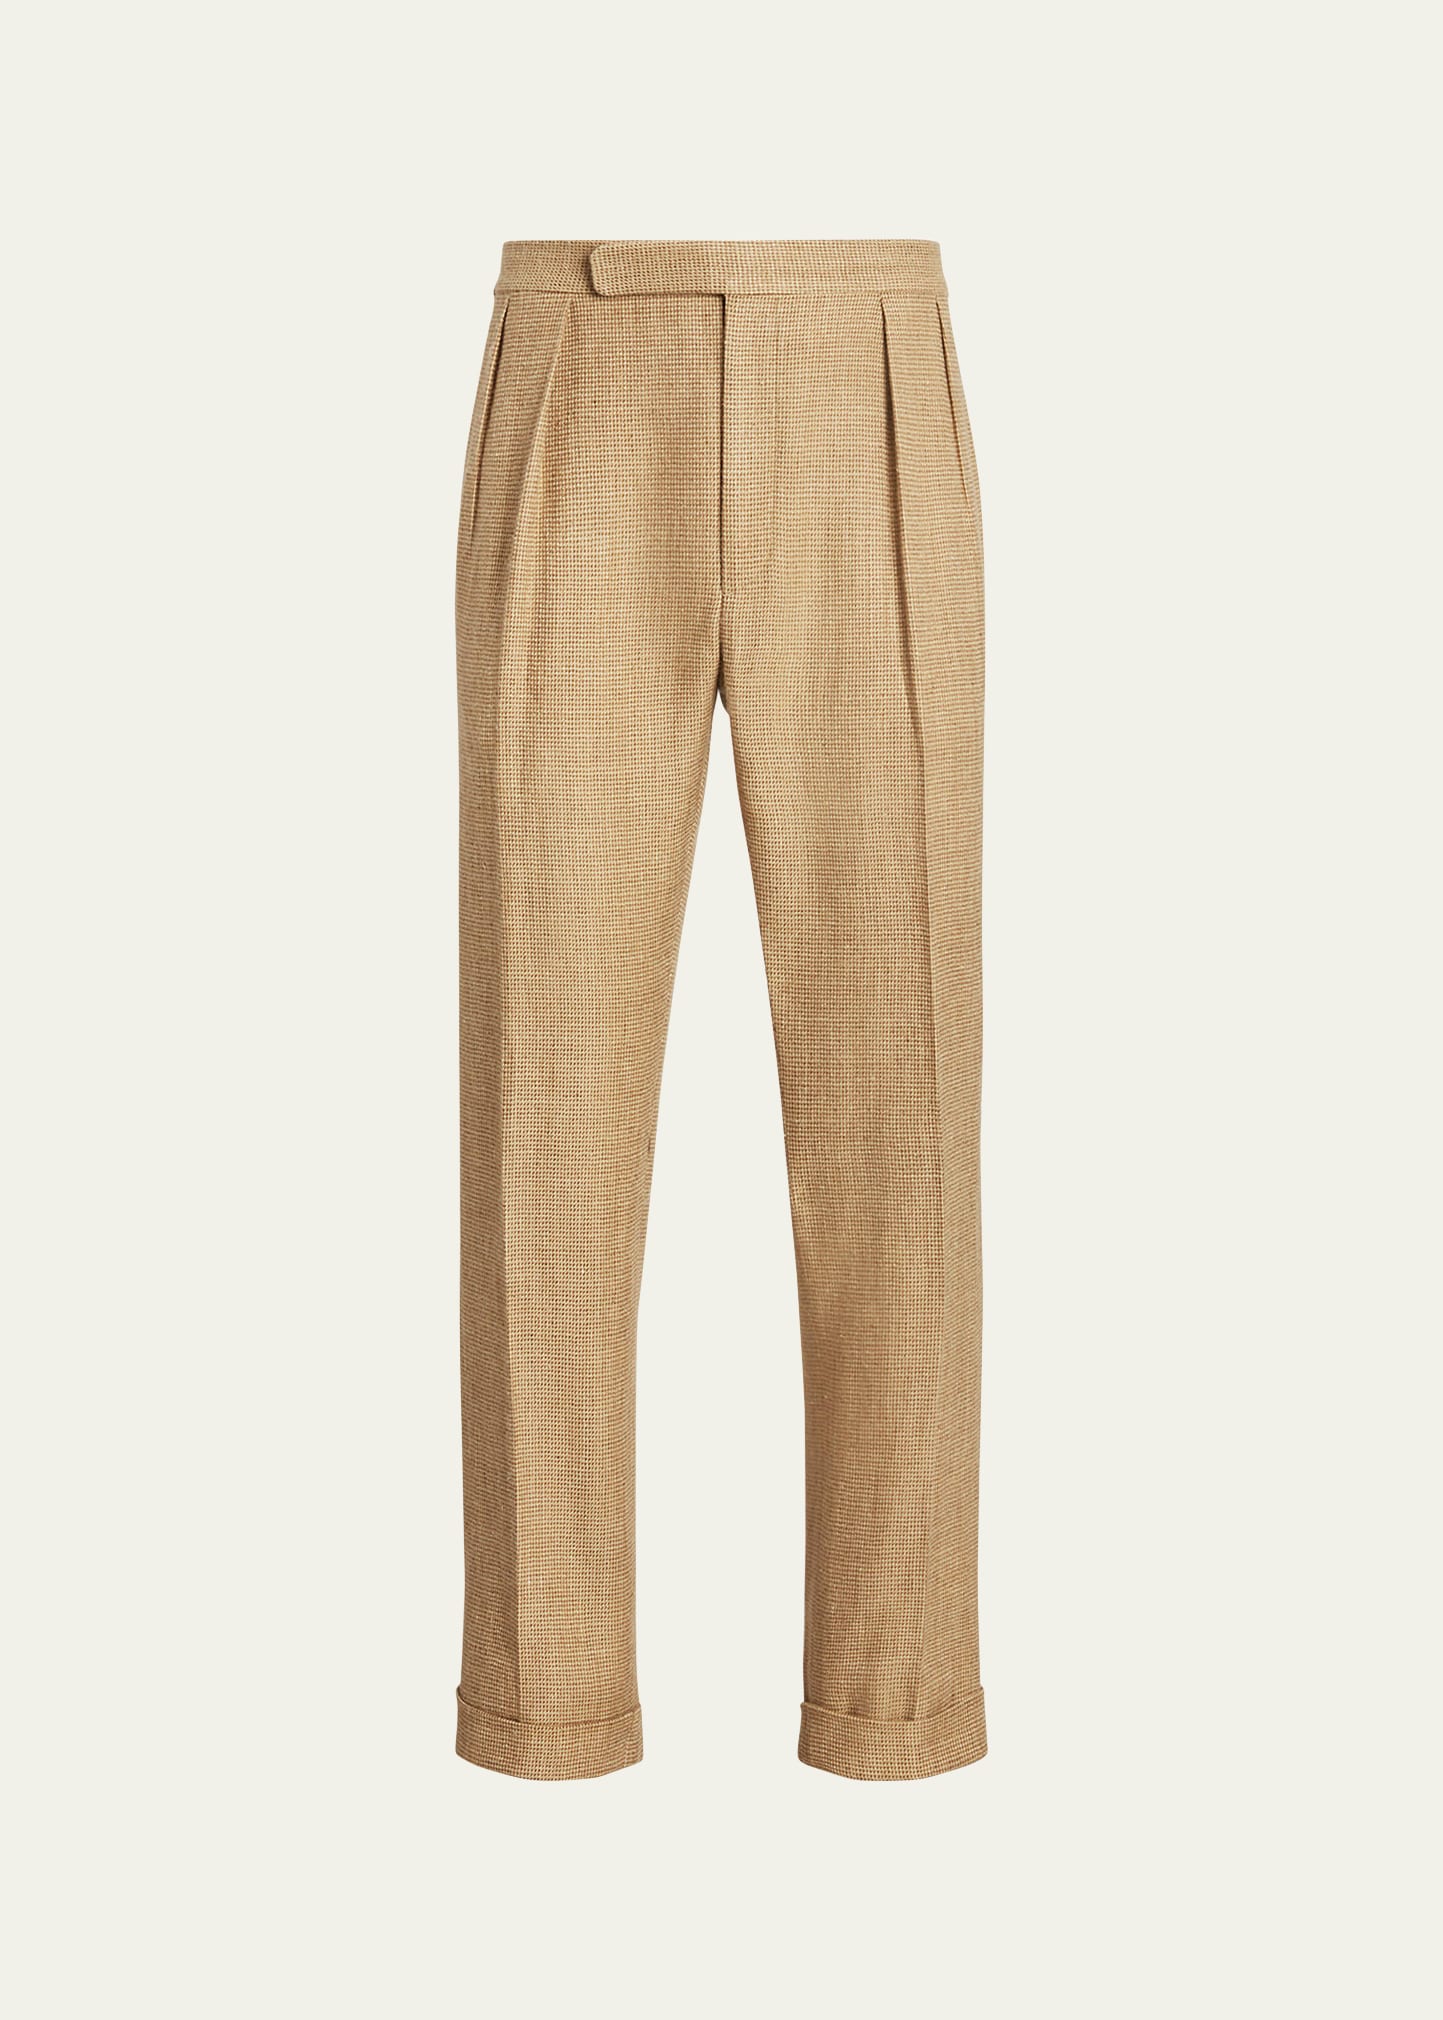 Men's Gregory Pleated Trousers